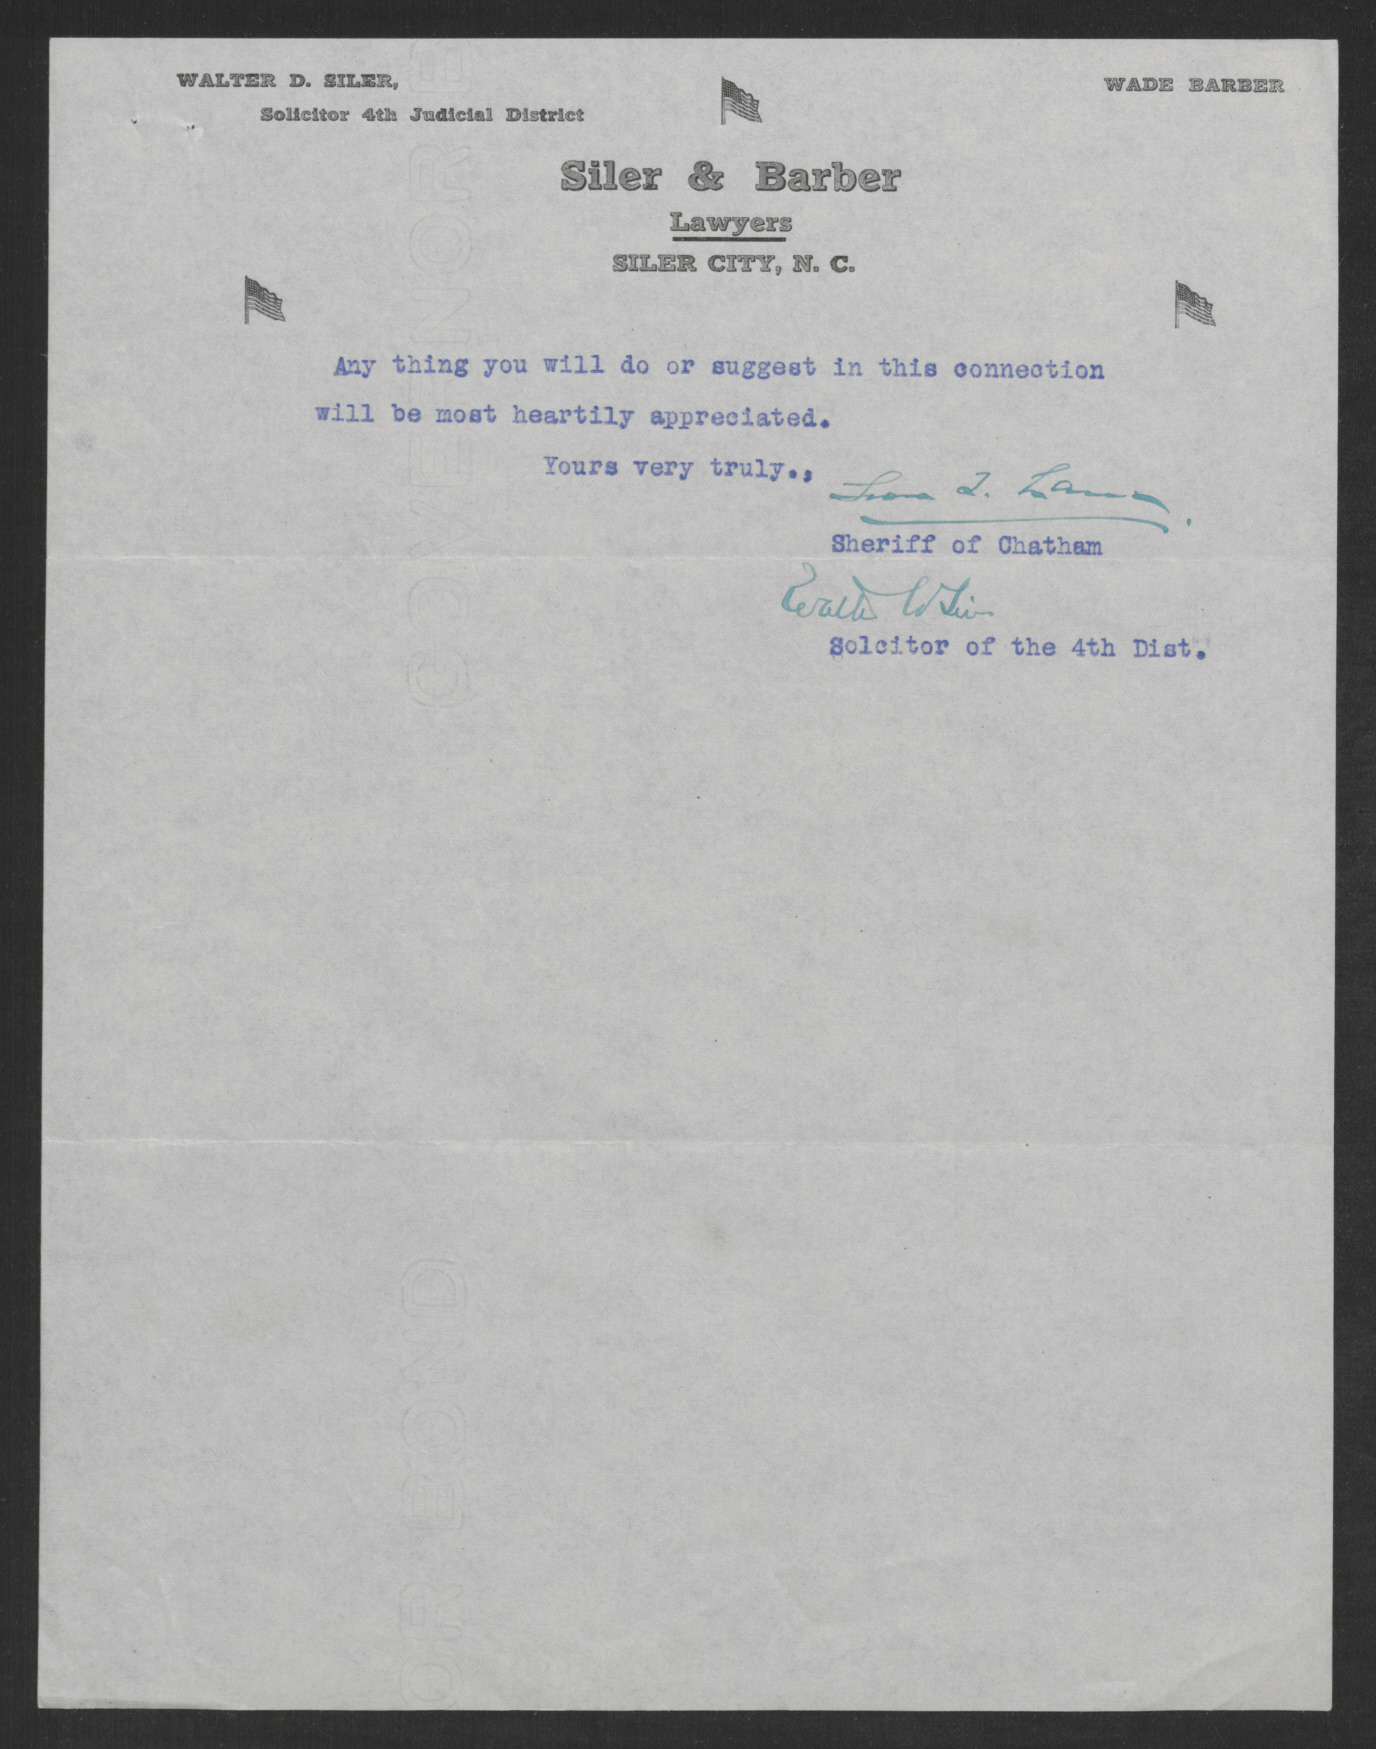 Letter from Leon T. Lane and Walter D. Siler to Thomas W. Bickett, August 2, 1917, page 2